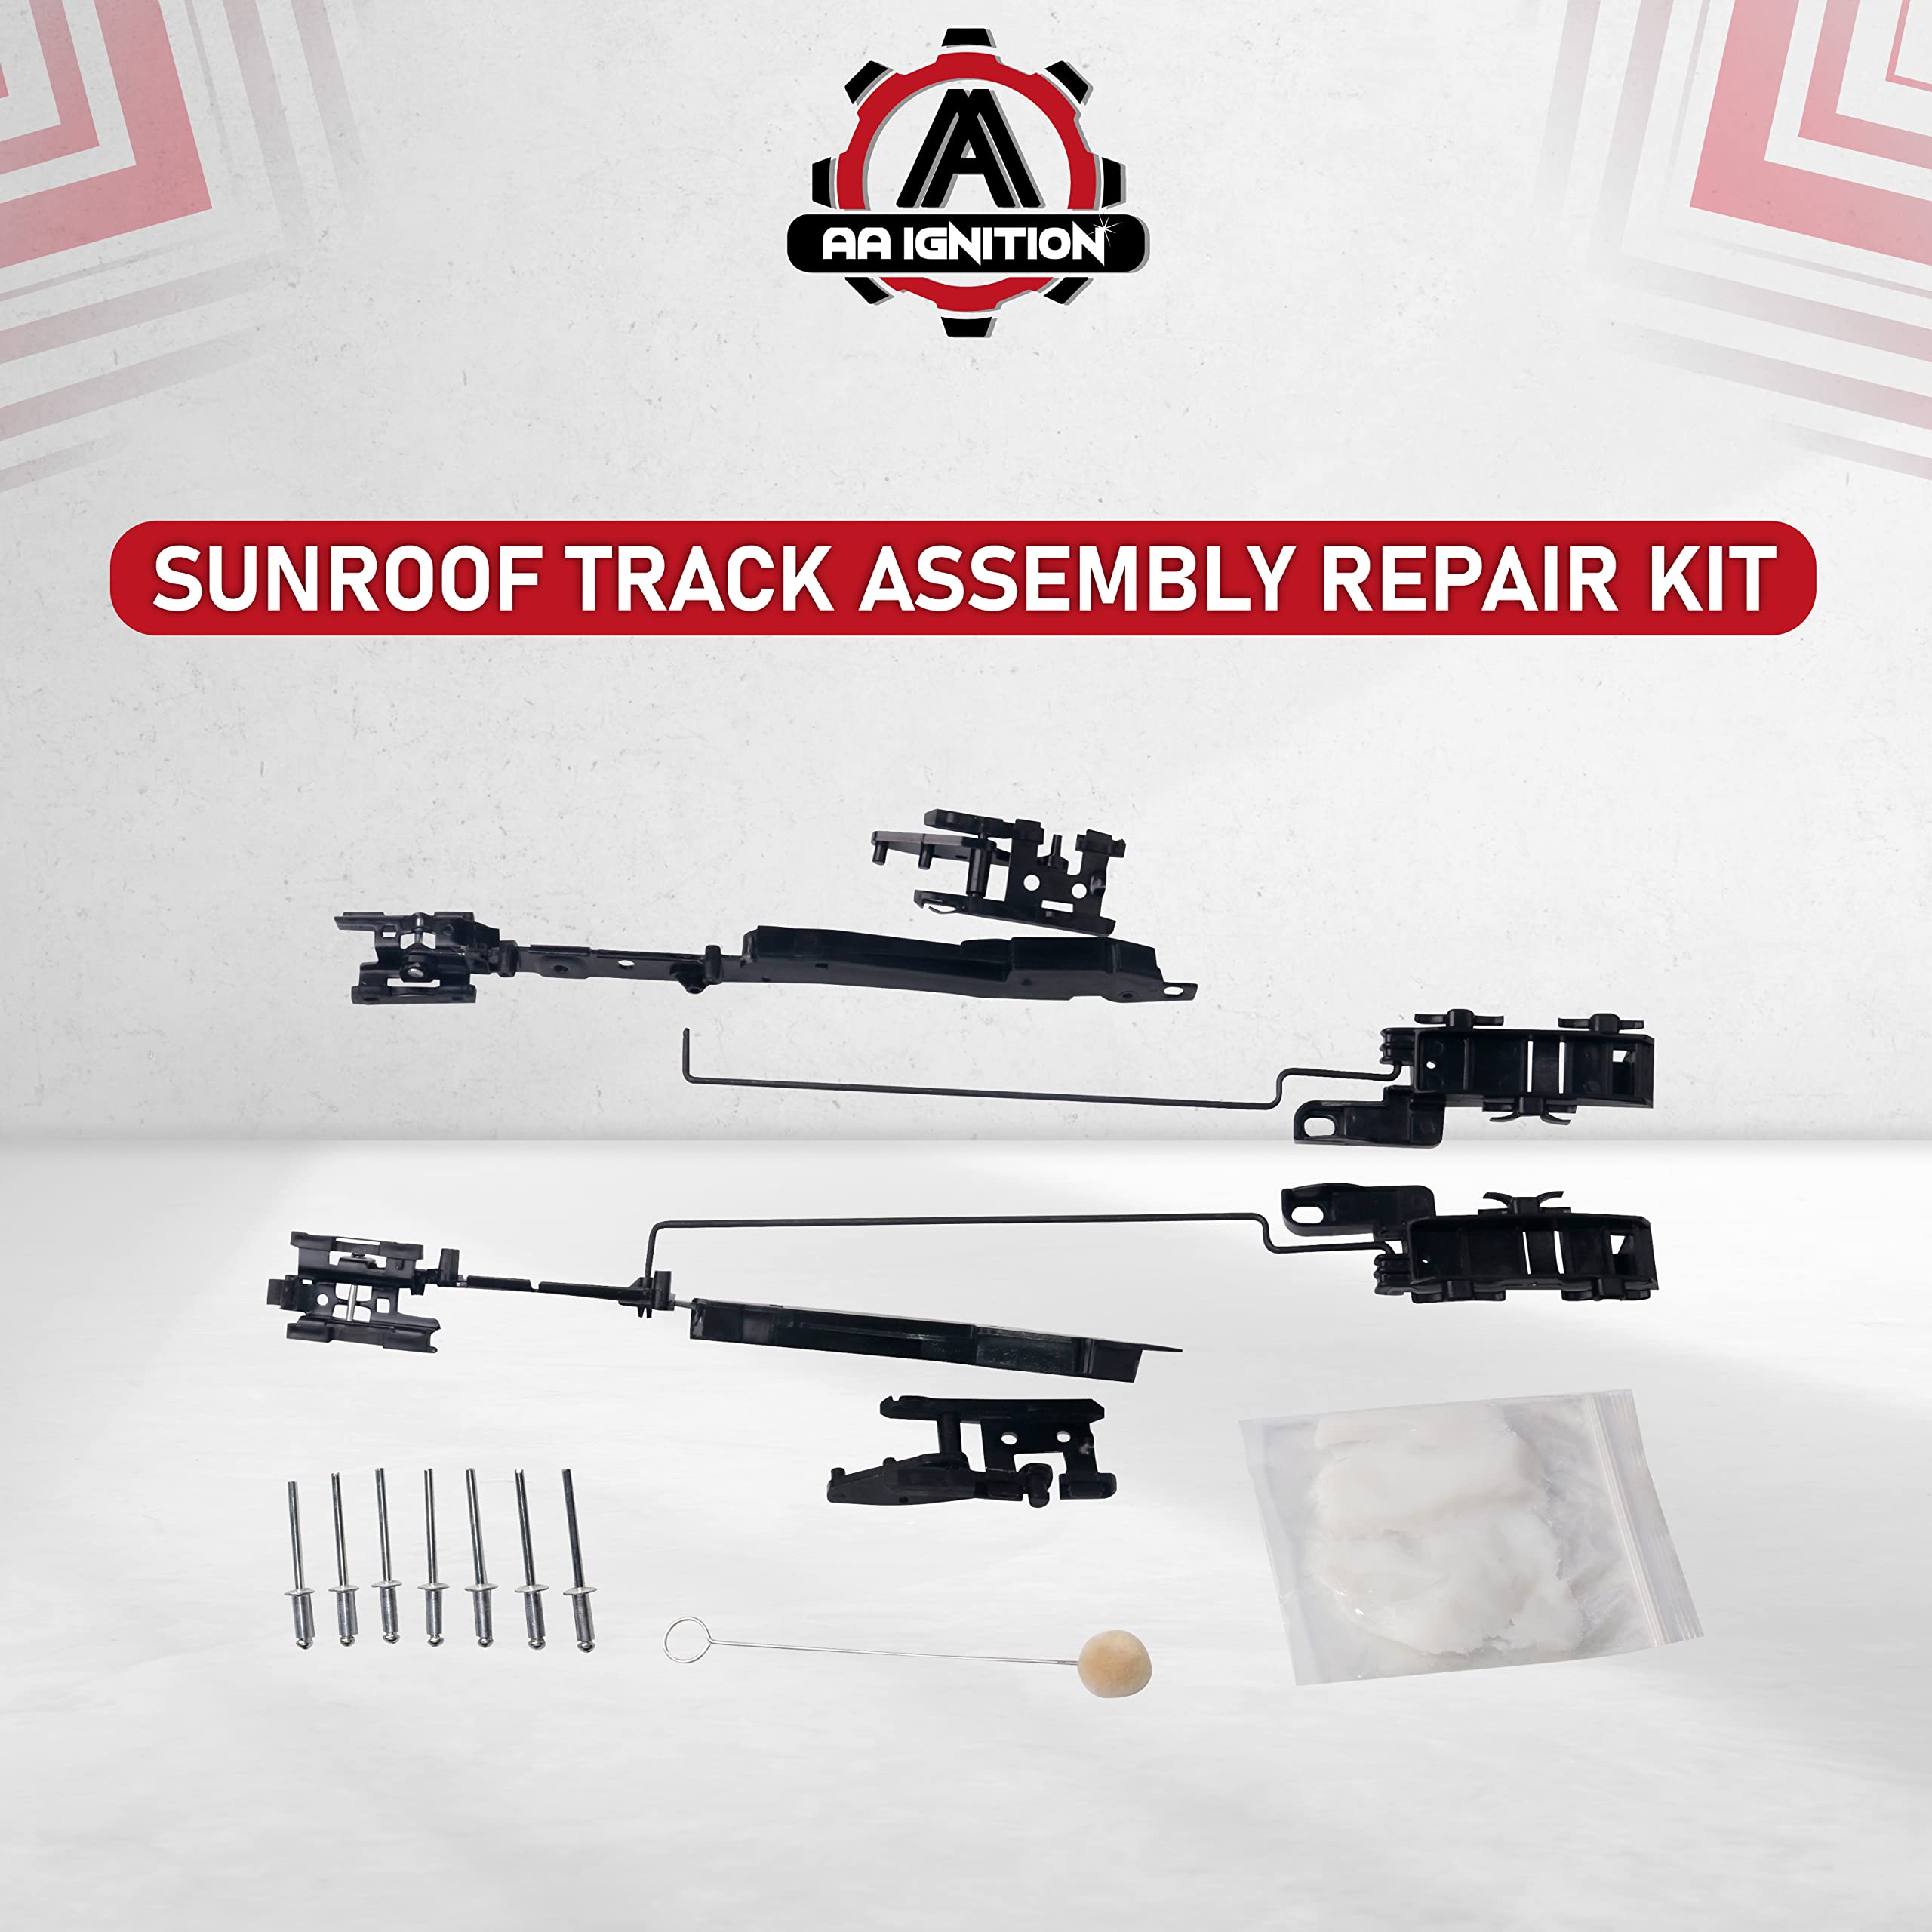 Sunroof Repair Kit for Ford-P3  - Like New